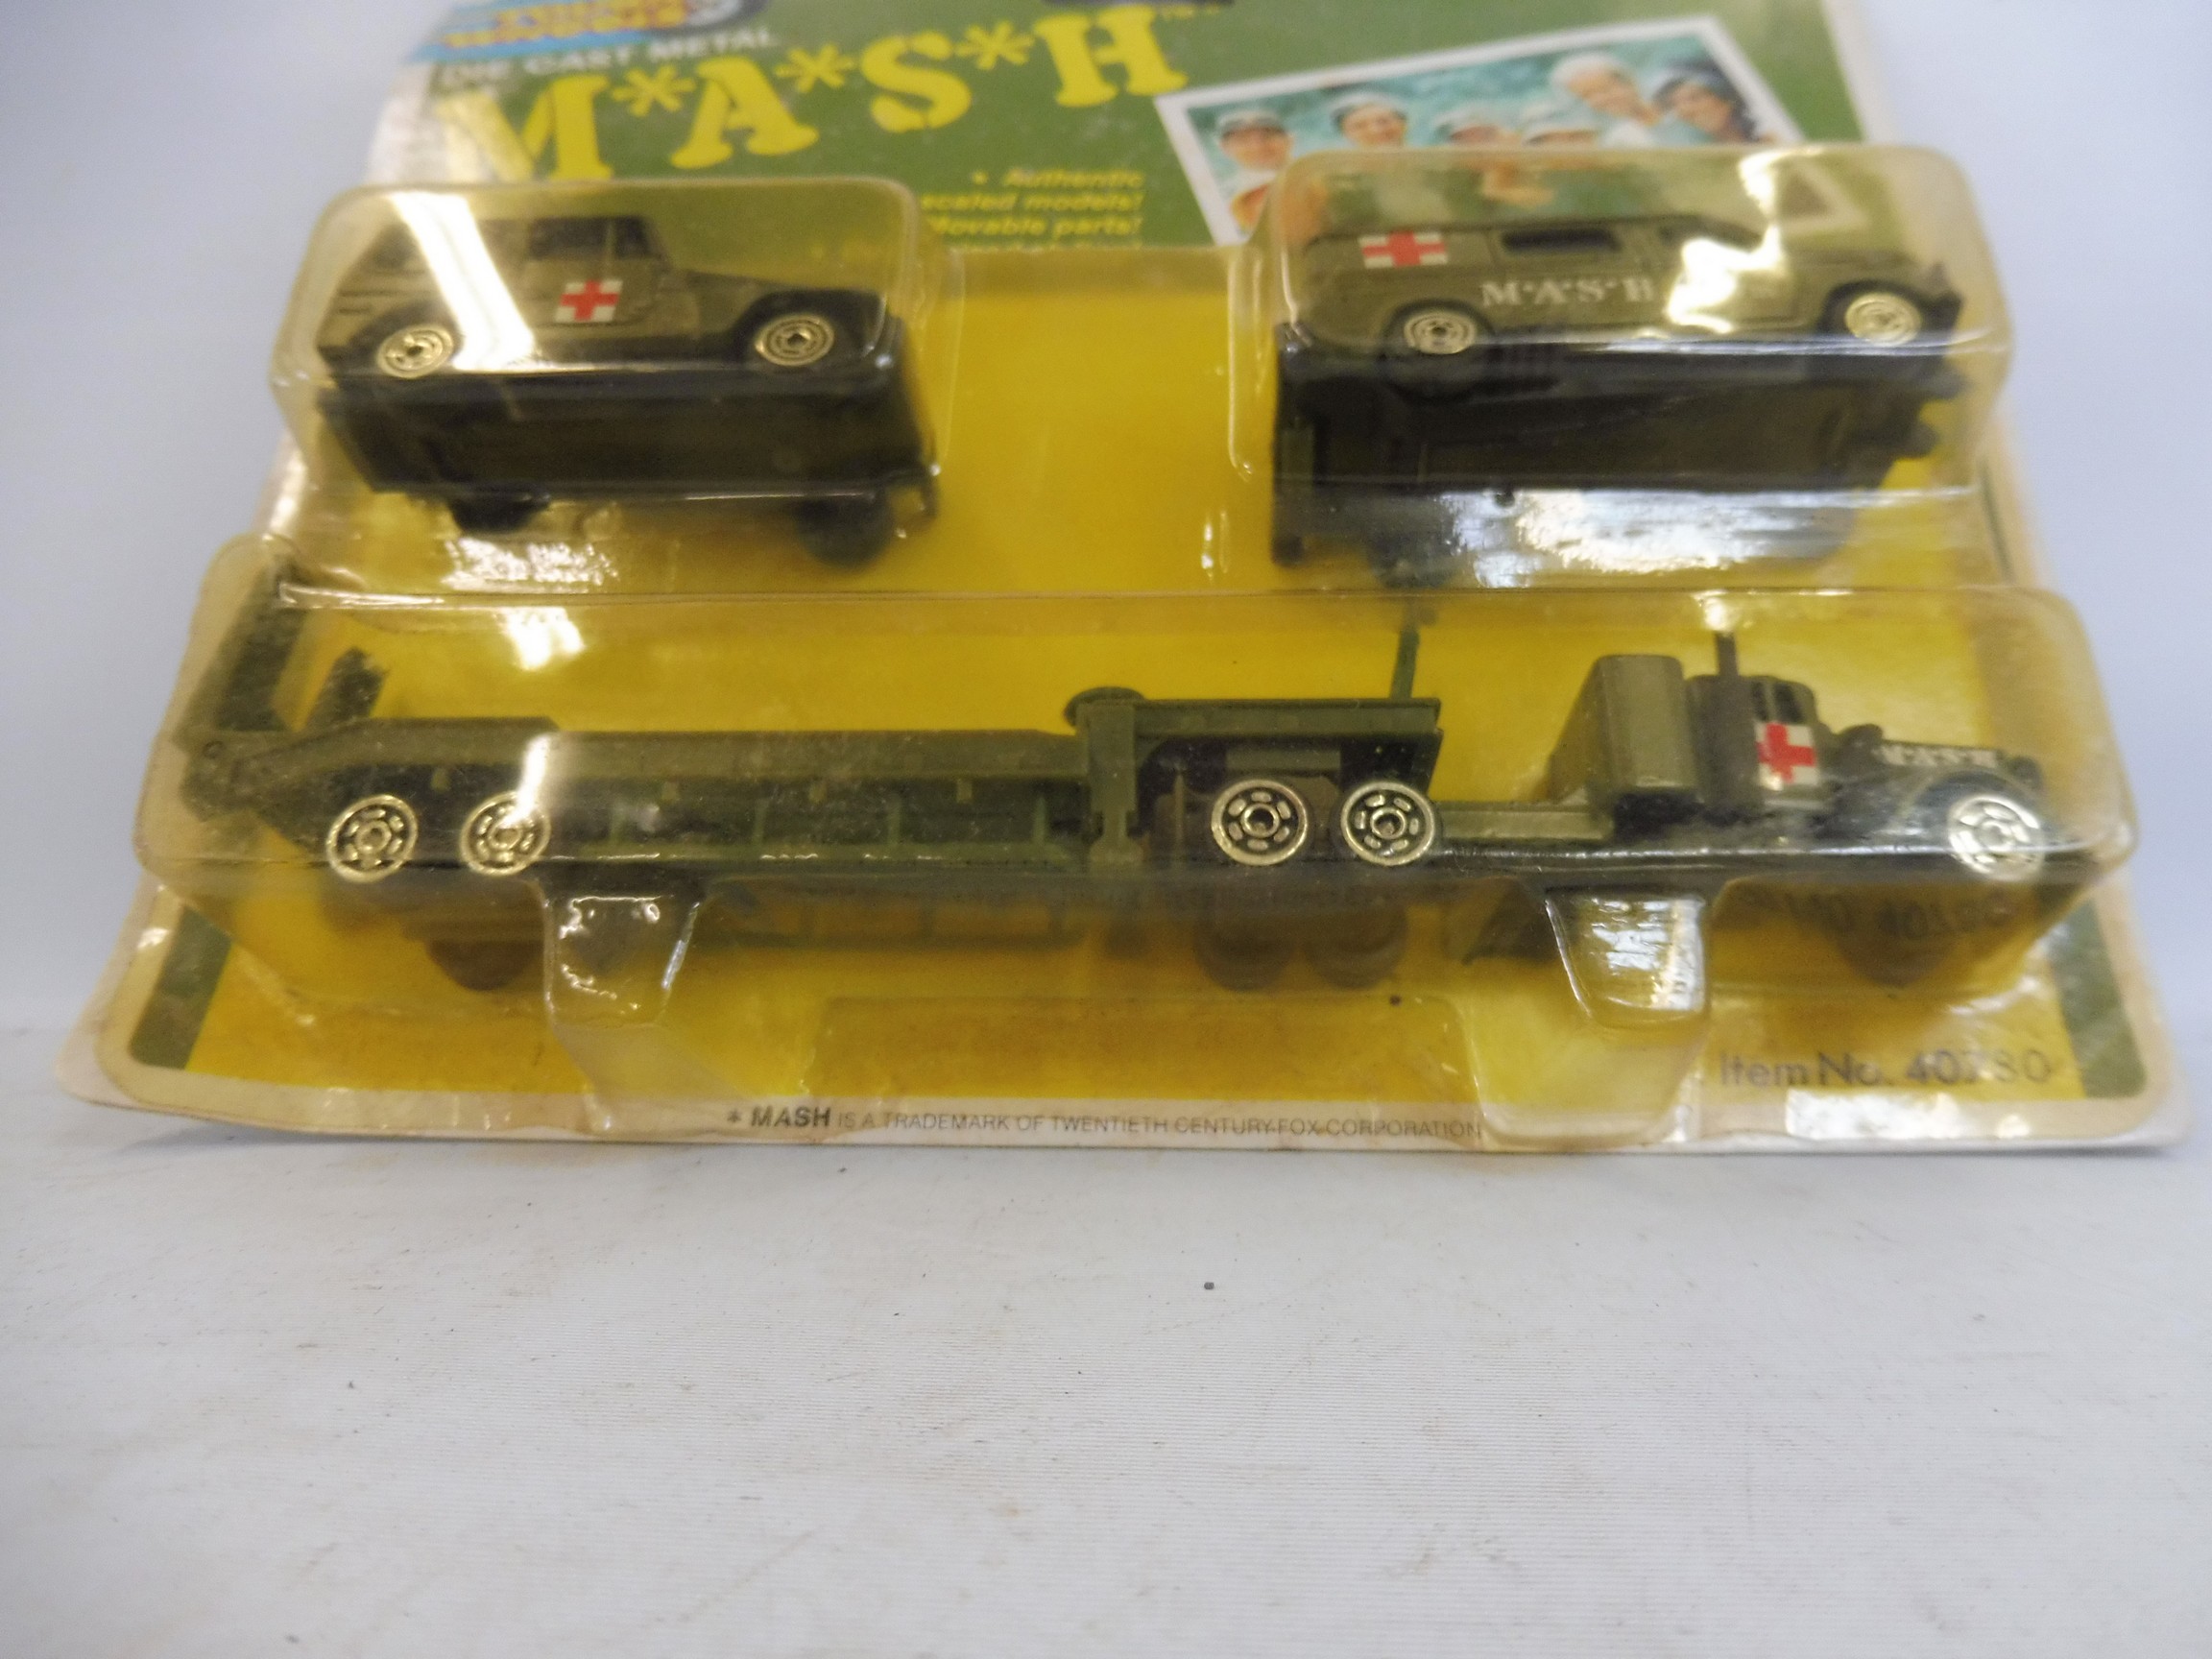 A carded MASH die-cast gift set, made by Rough Wheels. - Image 2 of 4